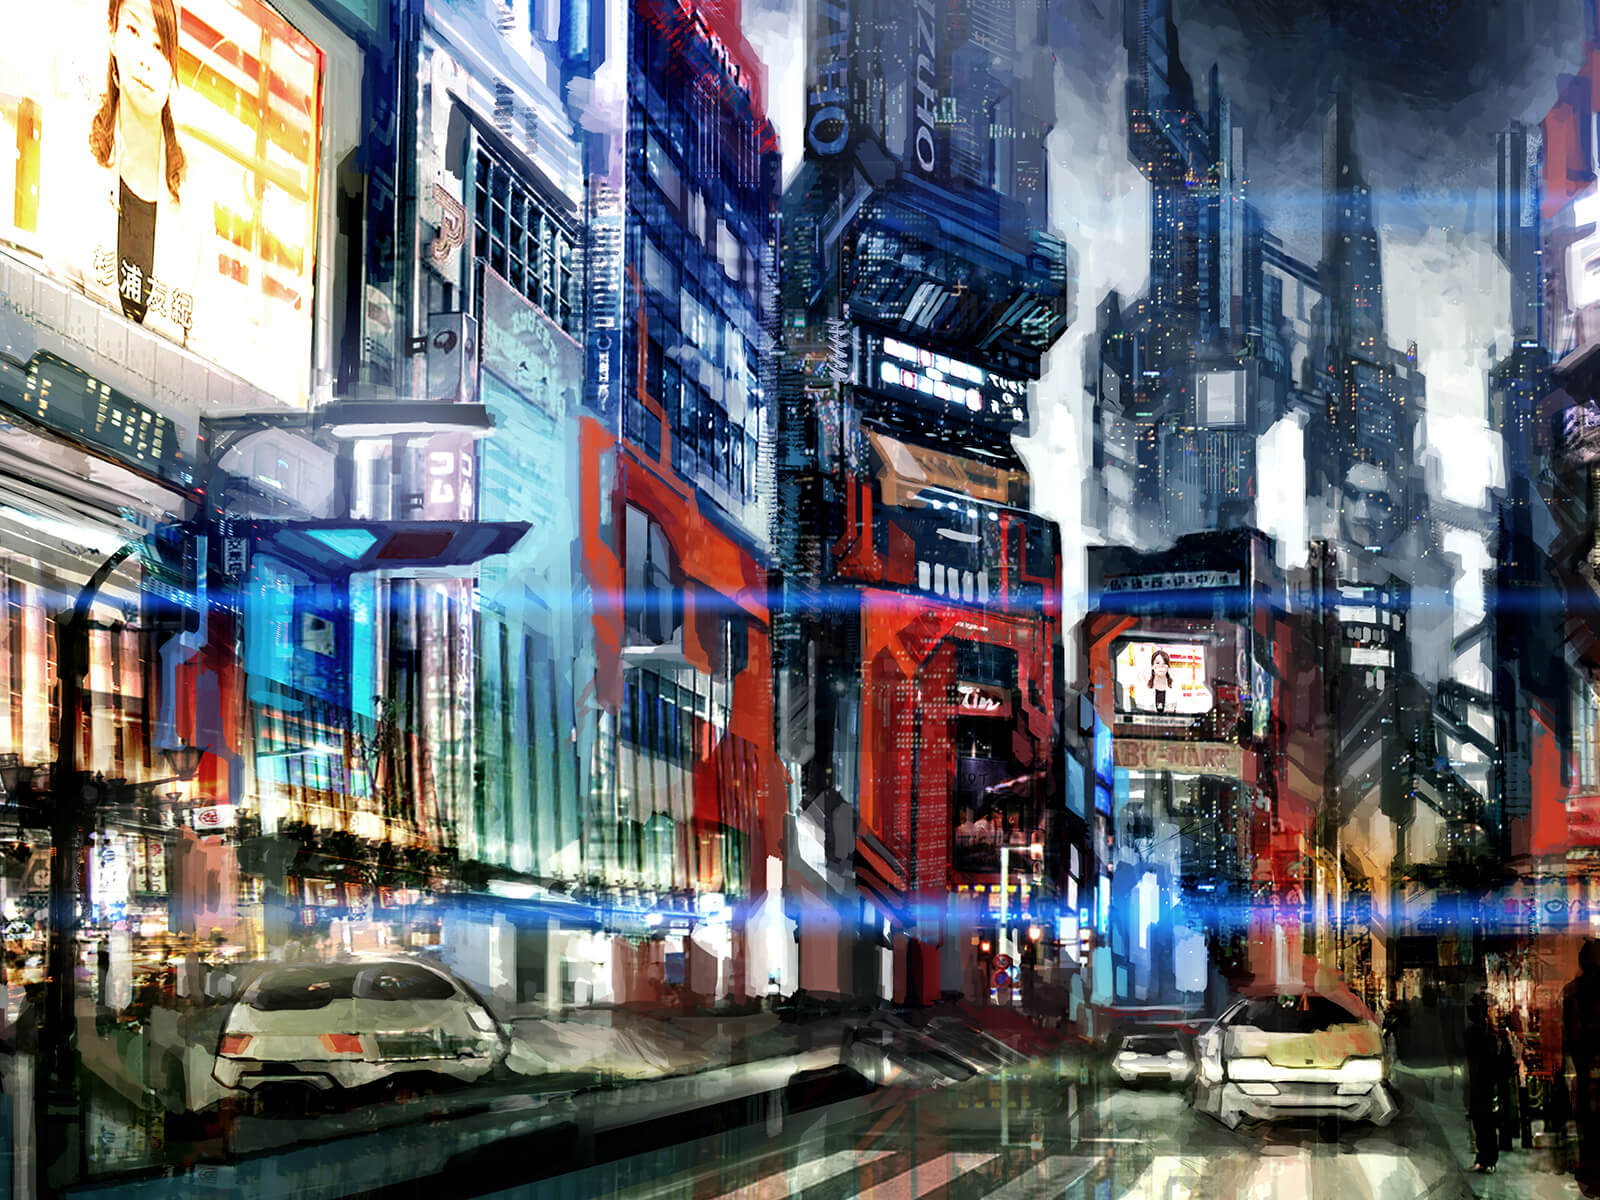 A cyberpunk-style city street at night, flanked by brightly lit skyscrapers adorned with projected images and video.